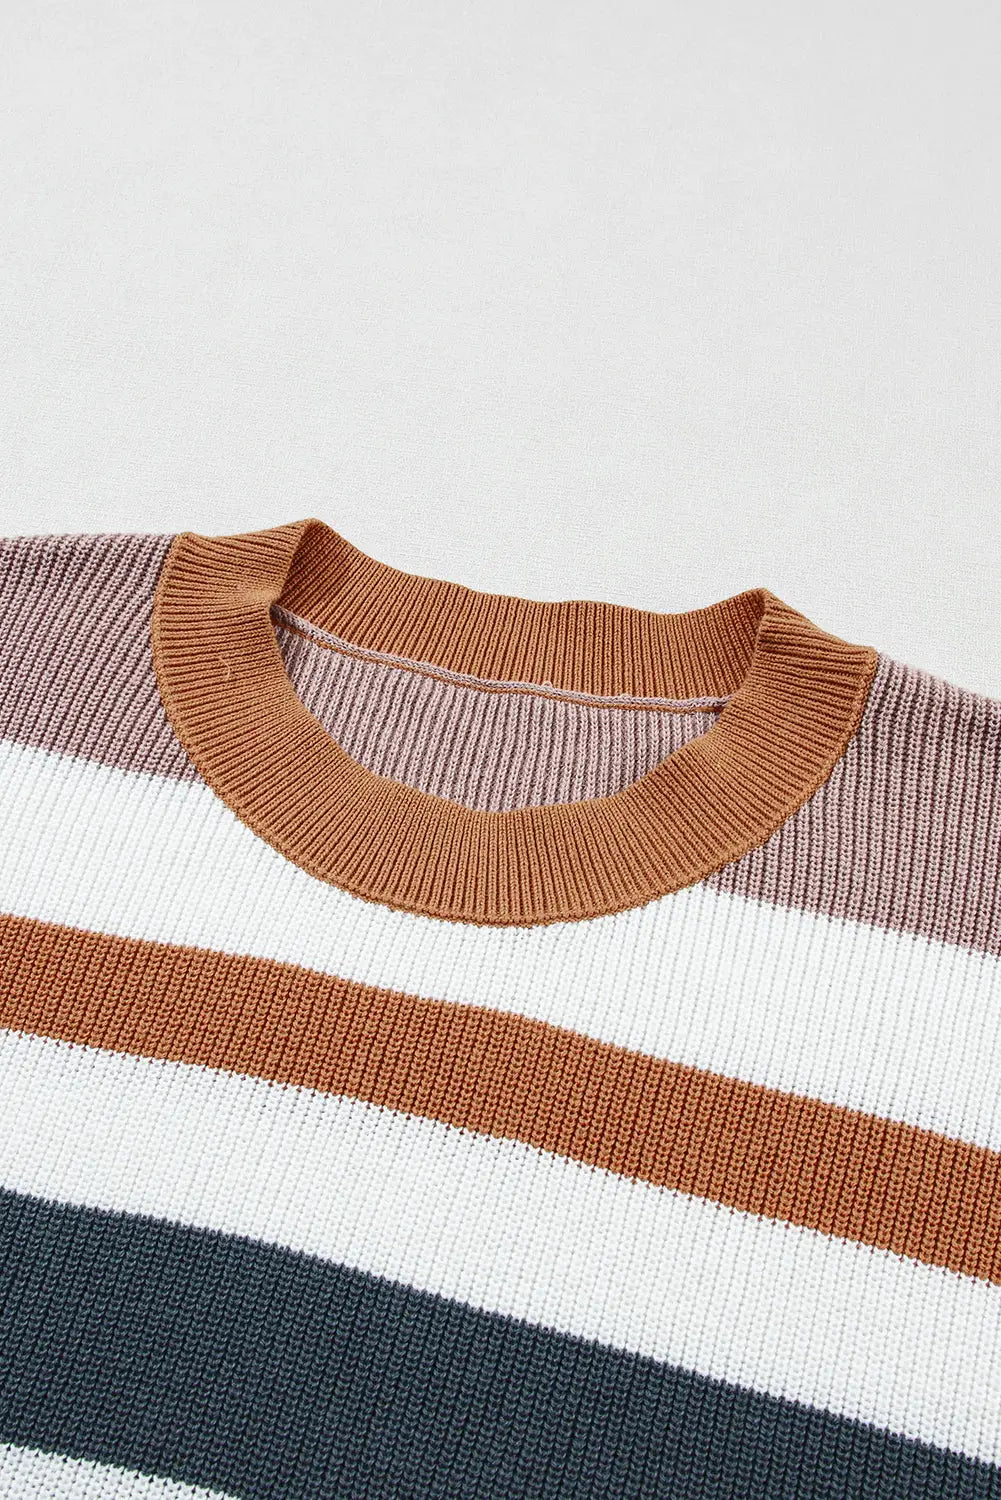 Camel striped knit crew neck t shirt sweater - tops